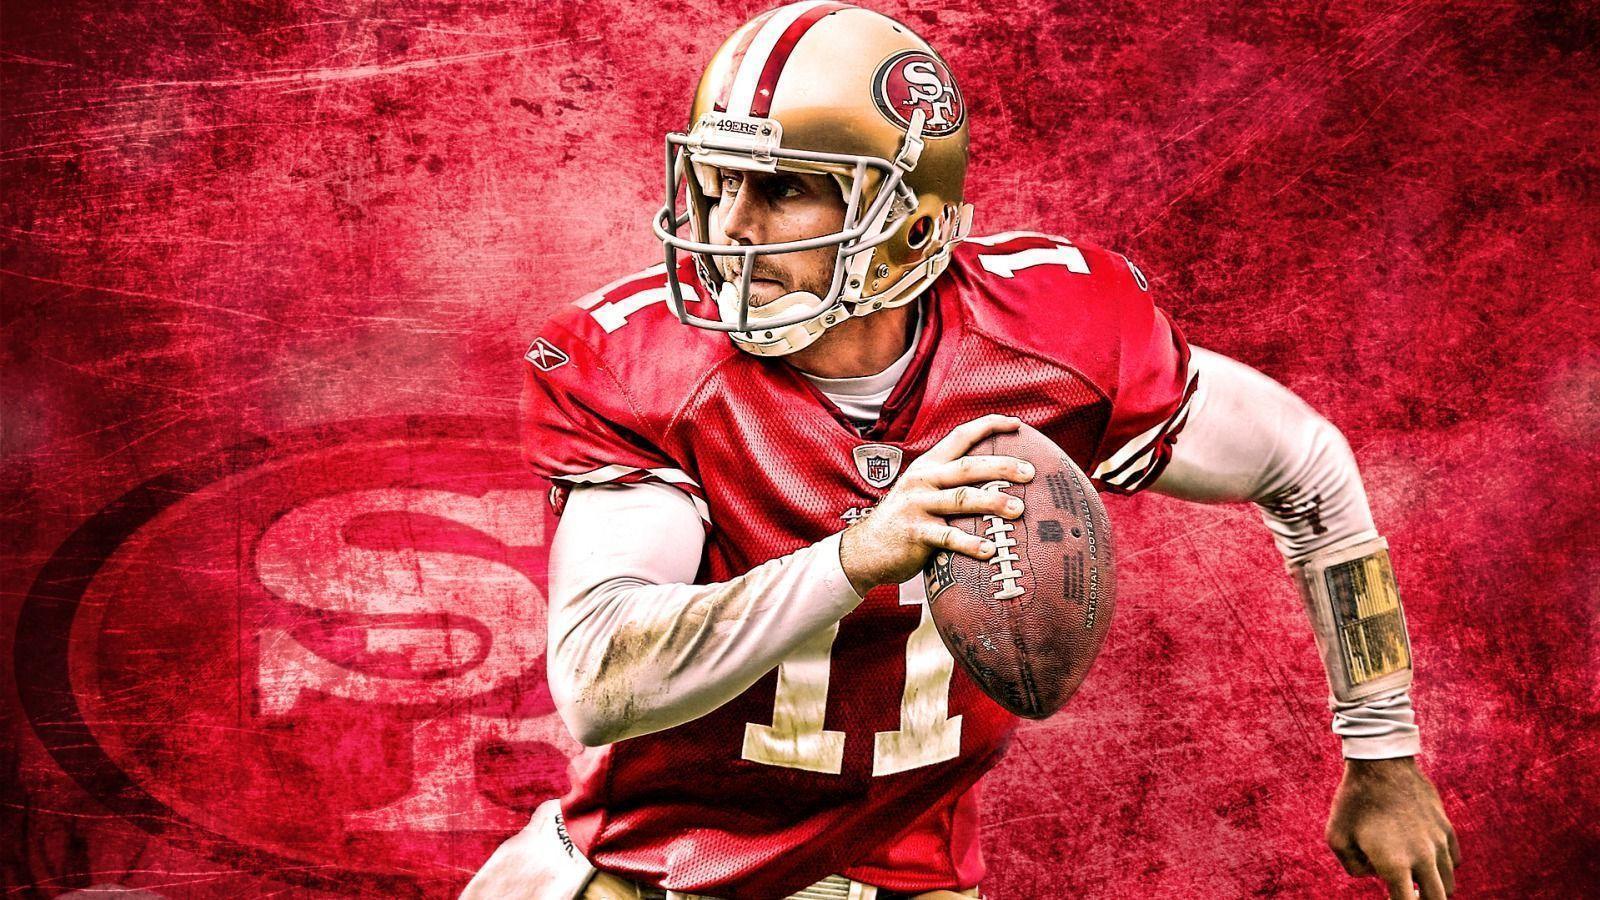 Wallpaper of the day: San Francisco 49ers. San Francisco 49ers